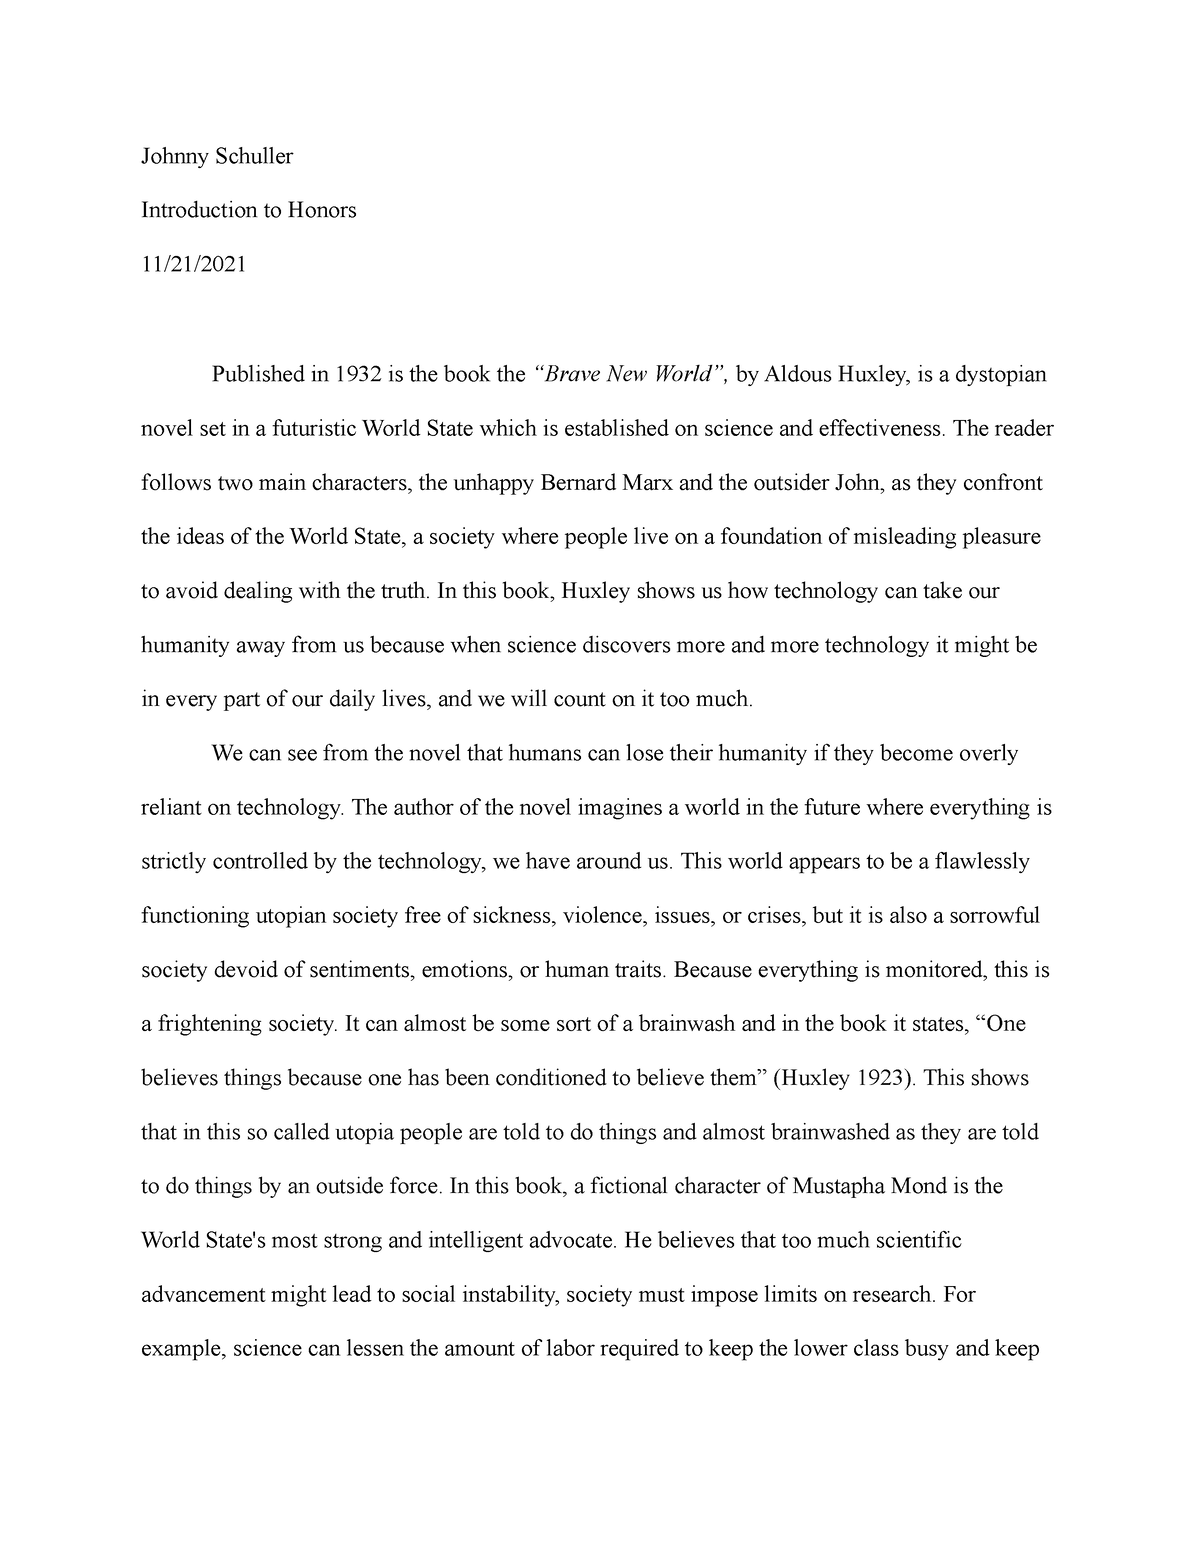 cofc honors college essay